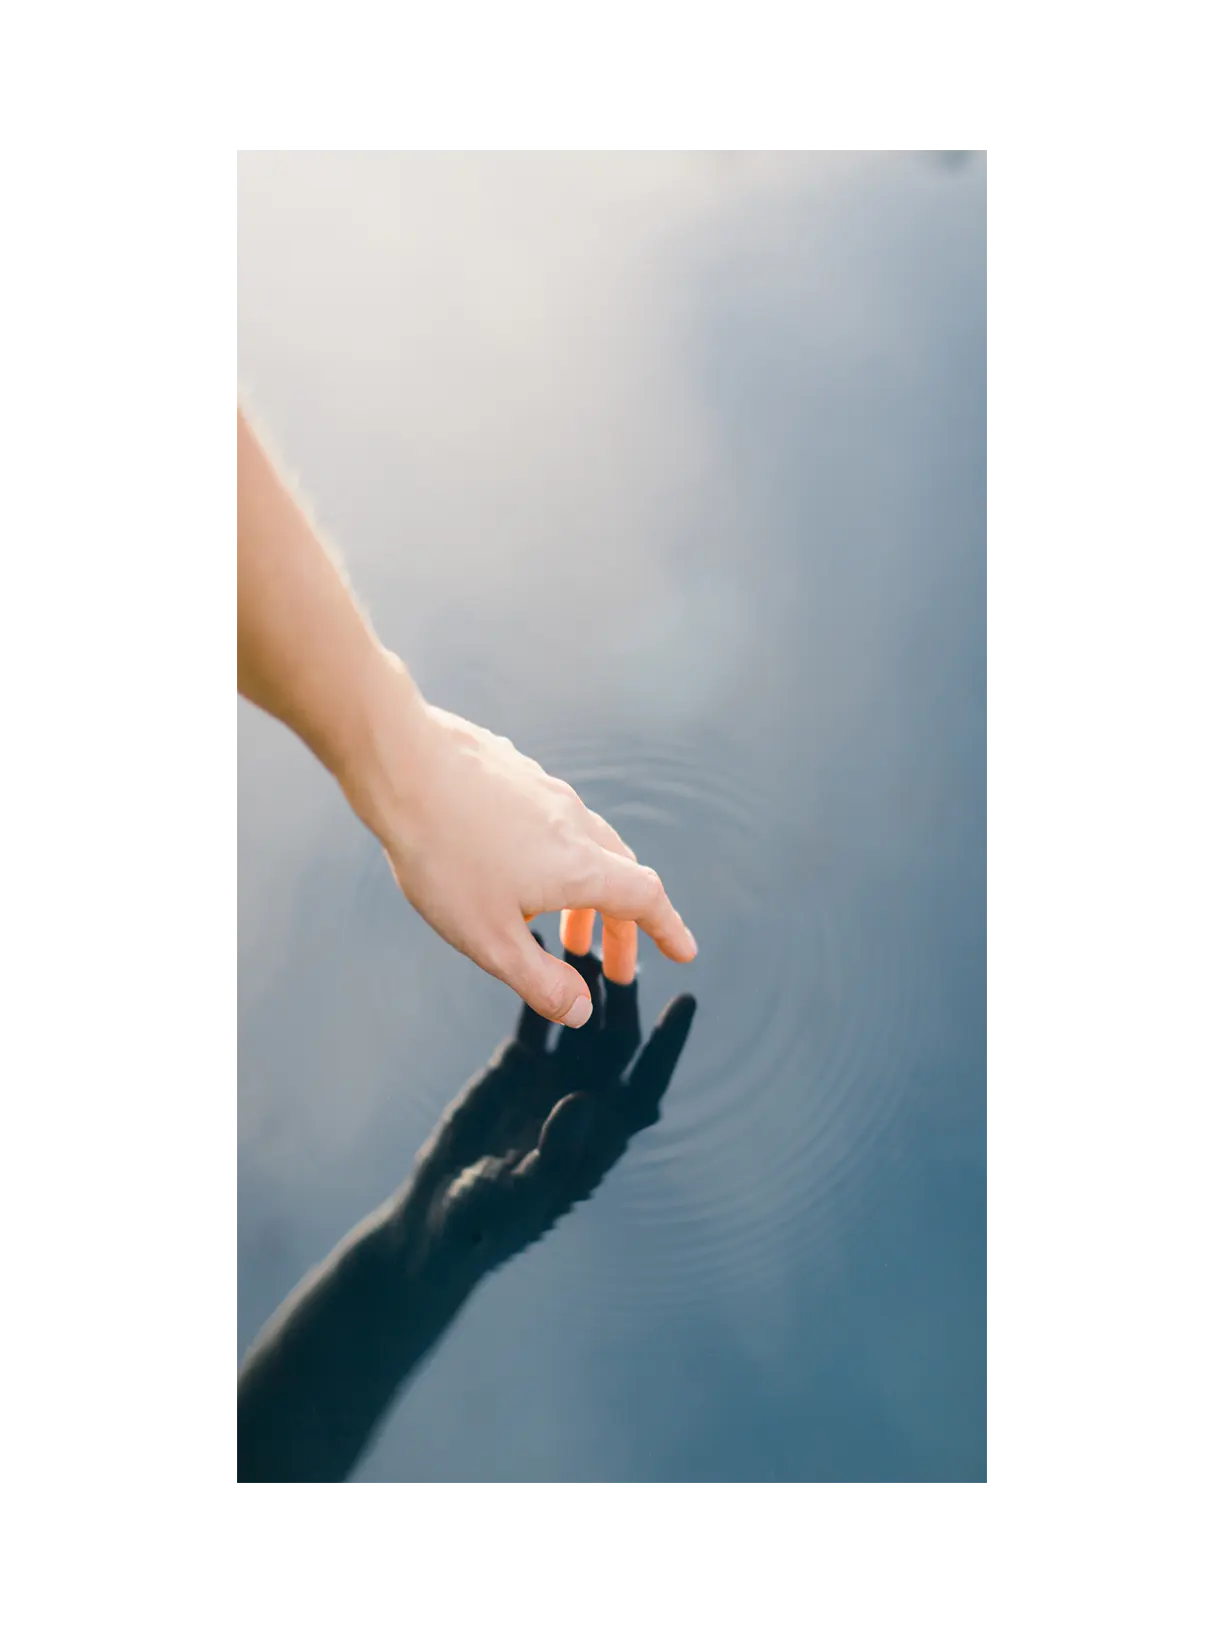 A hand touching water